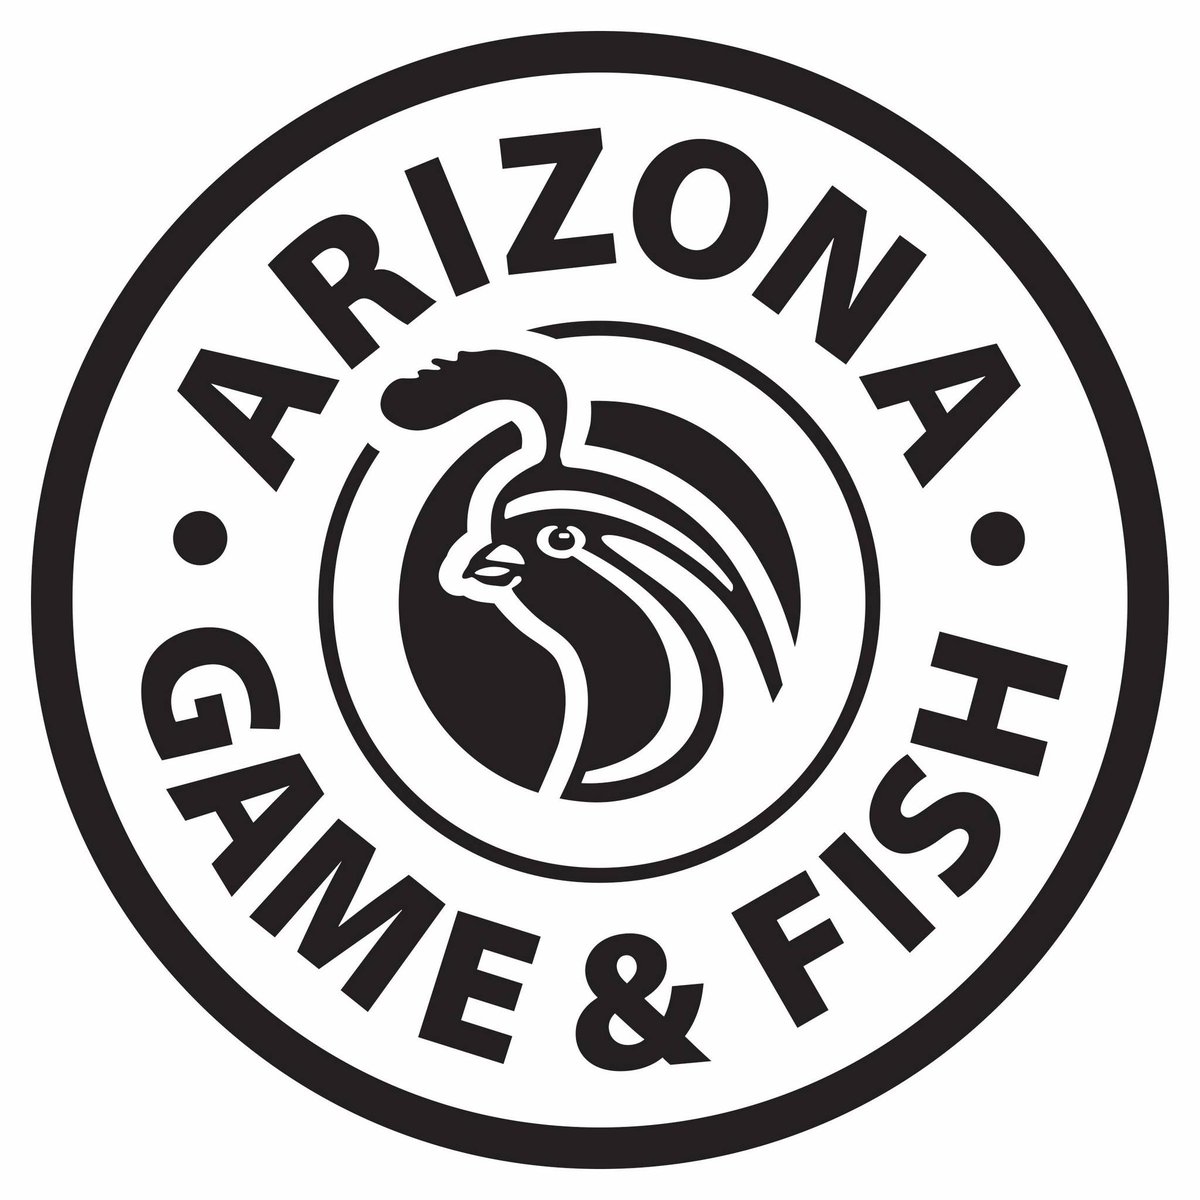 🌵 We'll be attending the Arizona Game and Fish Department (AGFD) Outdoor Expo on March 23-24th! Don't miss this opportunity to connect with nature and fellow outdoor enthusiasts. We hope to see ya there! Click here for more info: hubs.li/Q02pVjXw0 #WhyISDI #ArizonaOutdoors